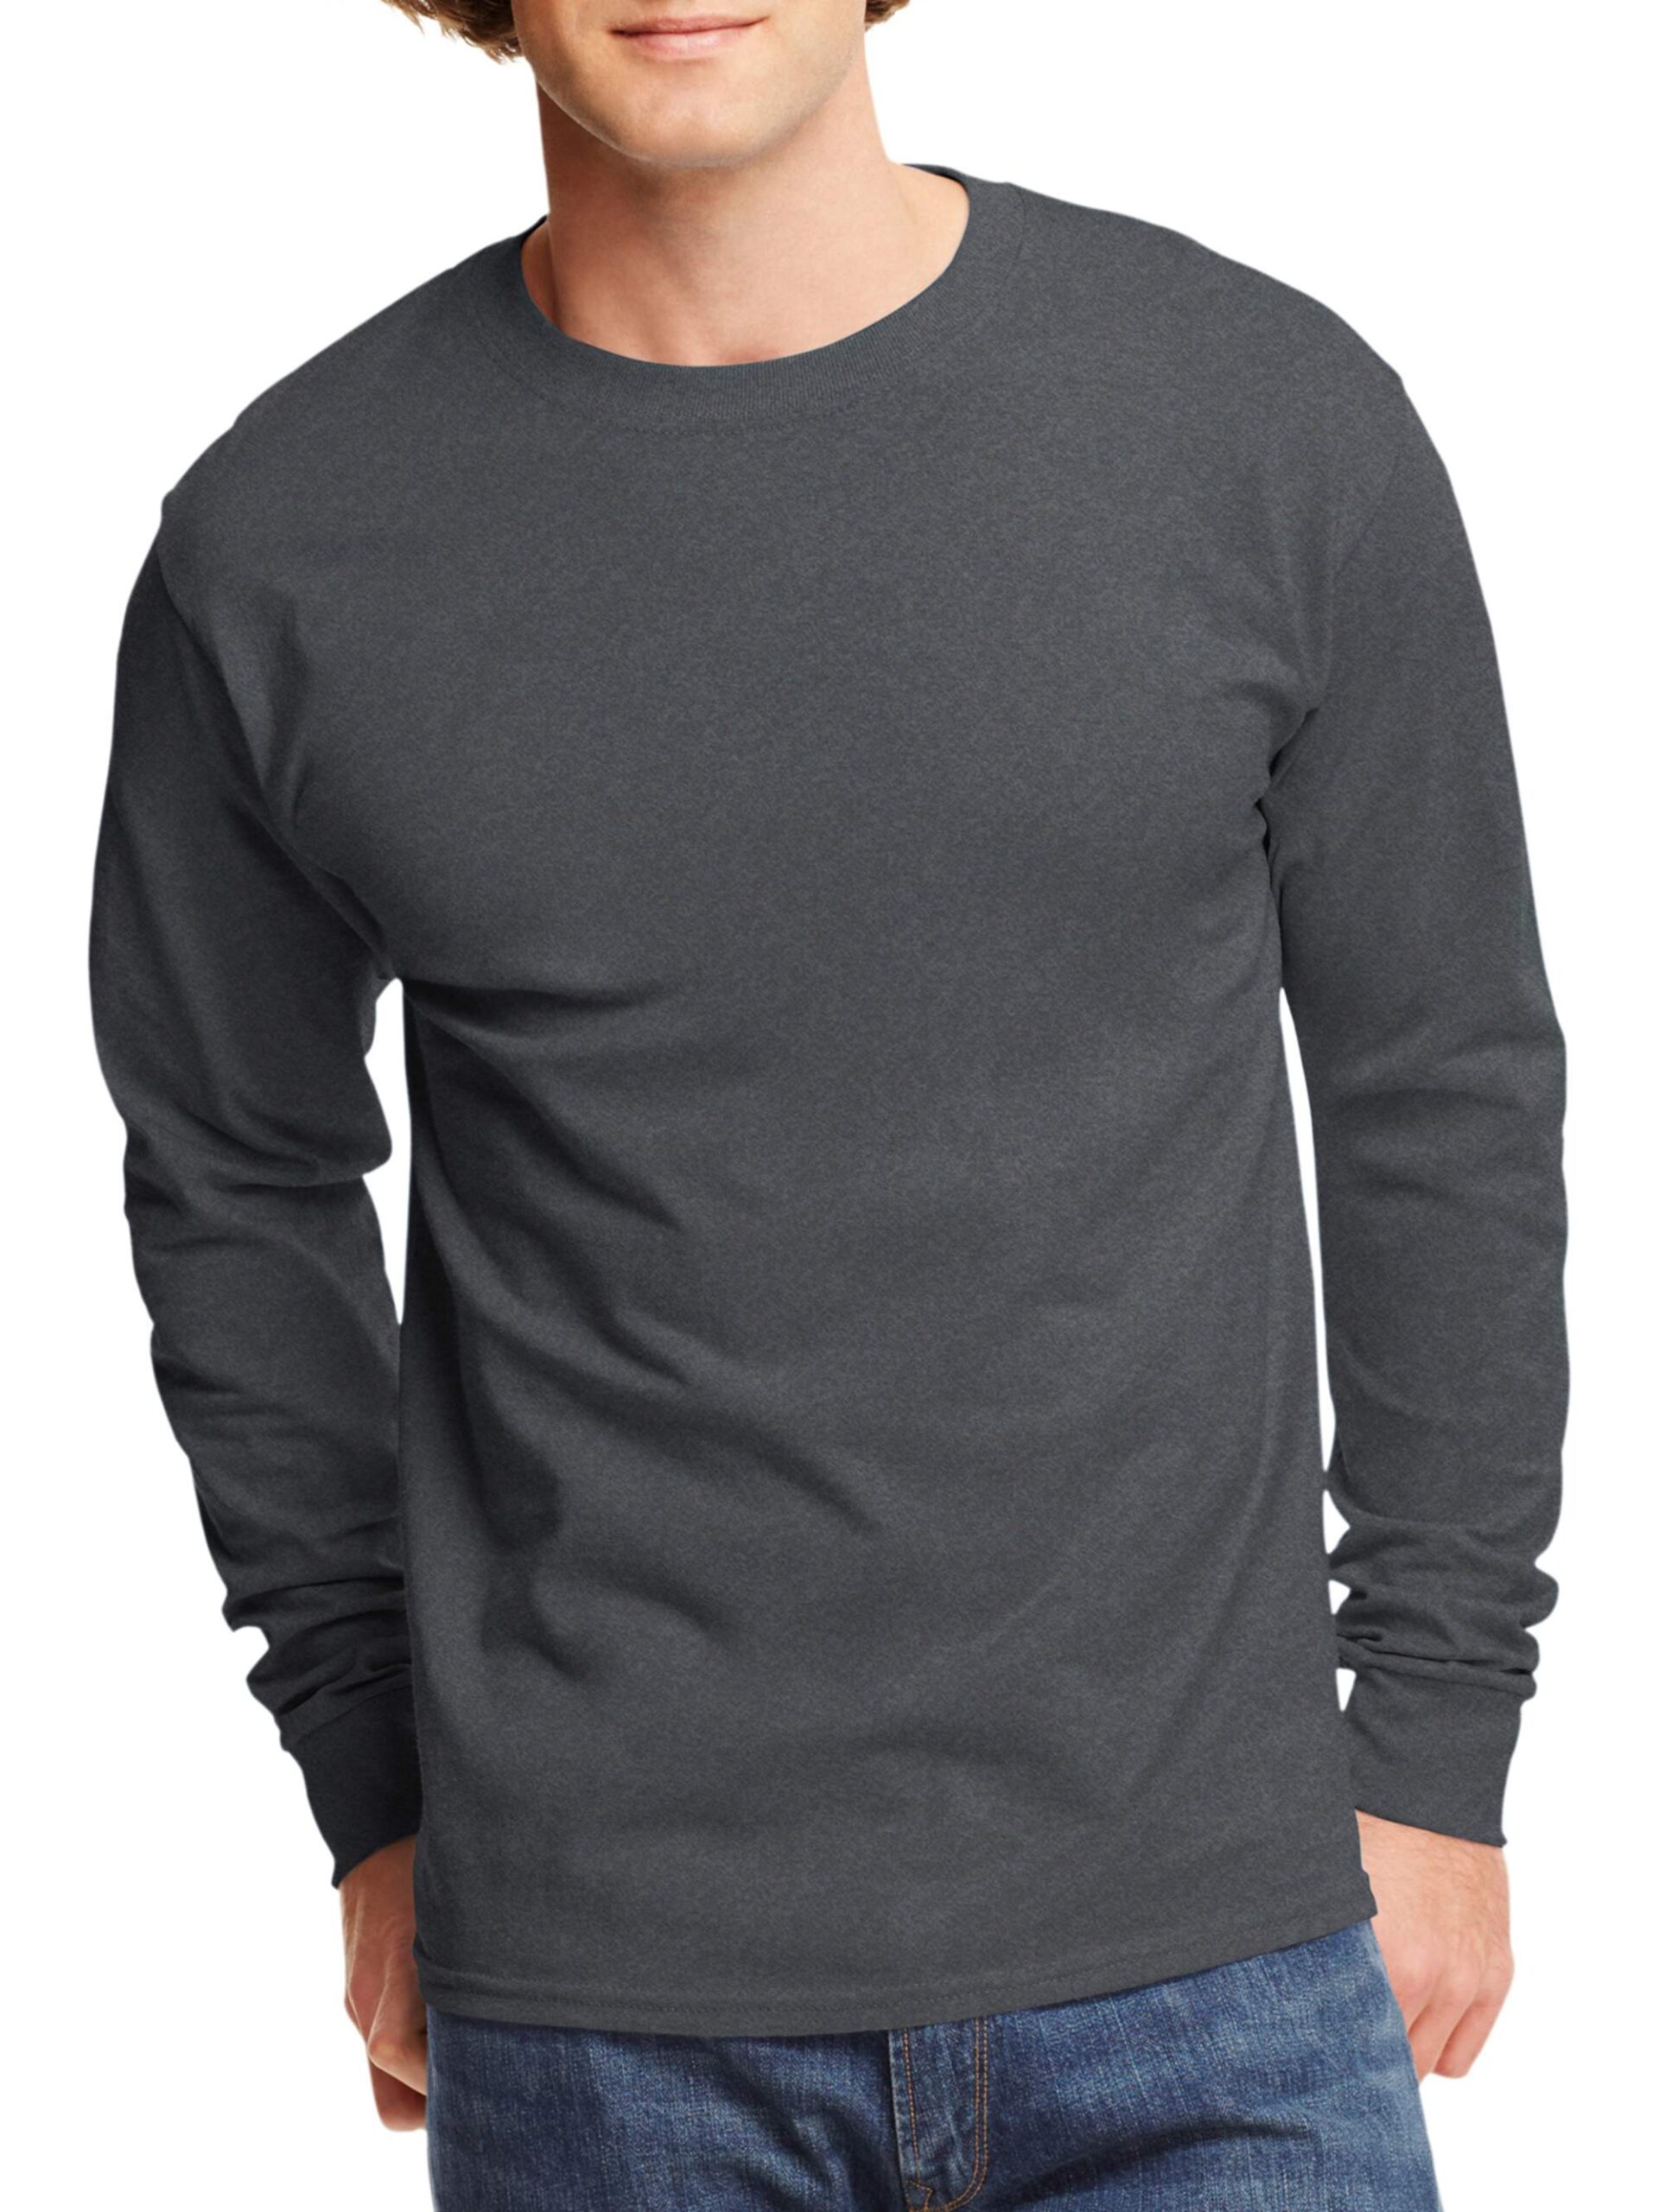 Attractive and elegant long sleeve t  shirt